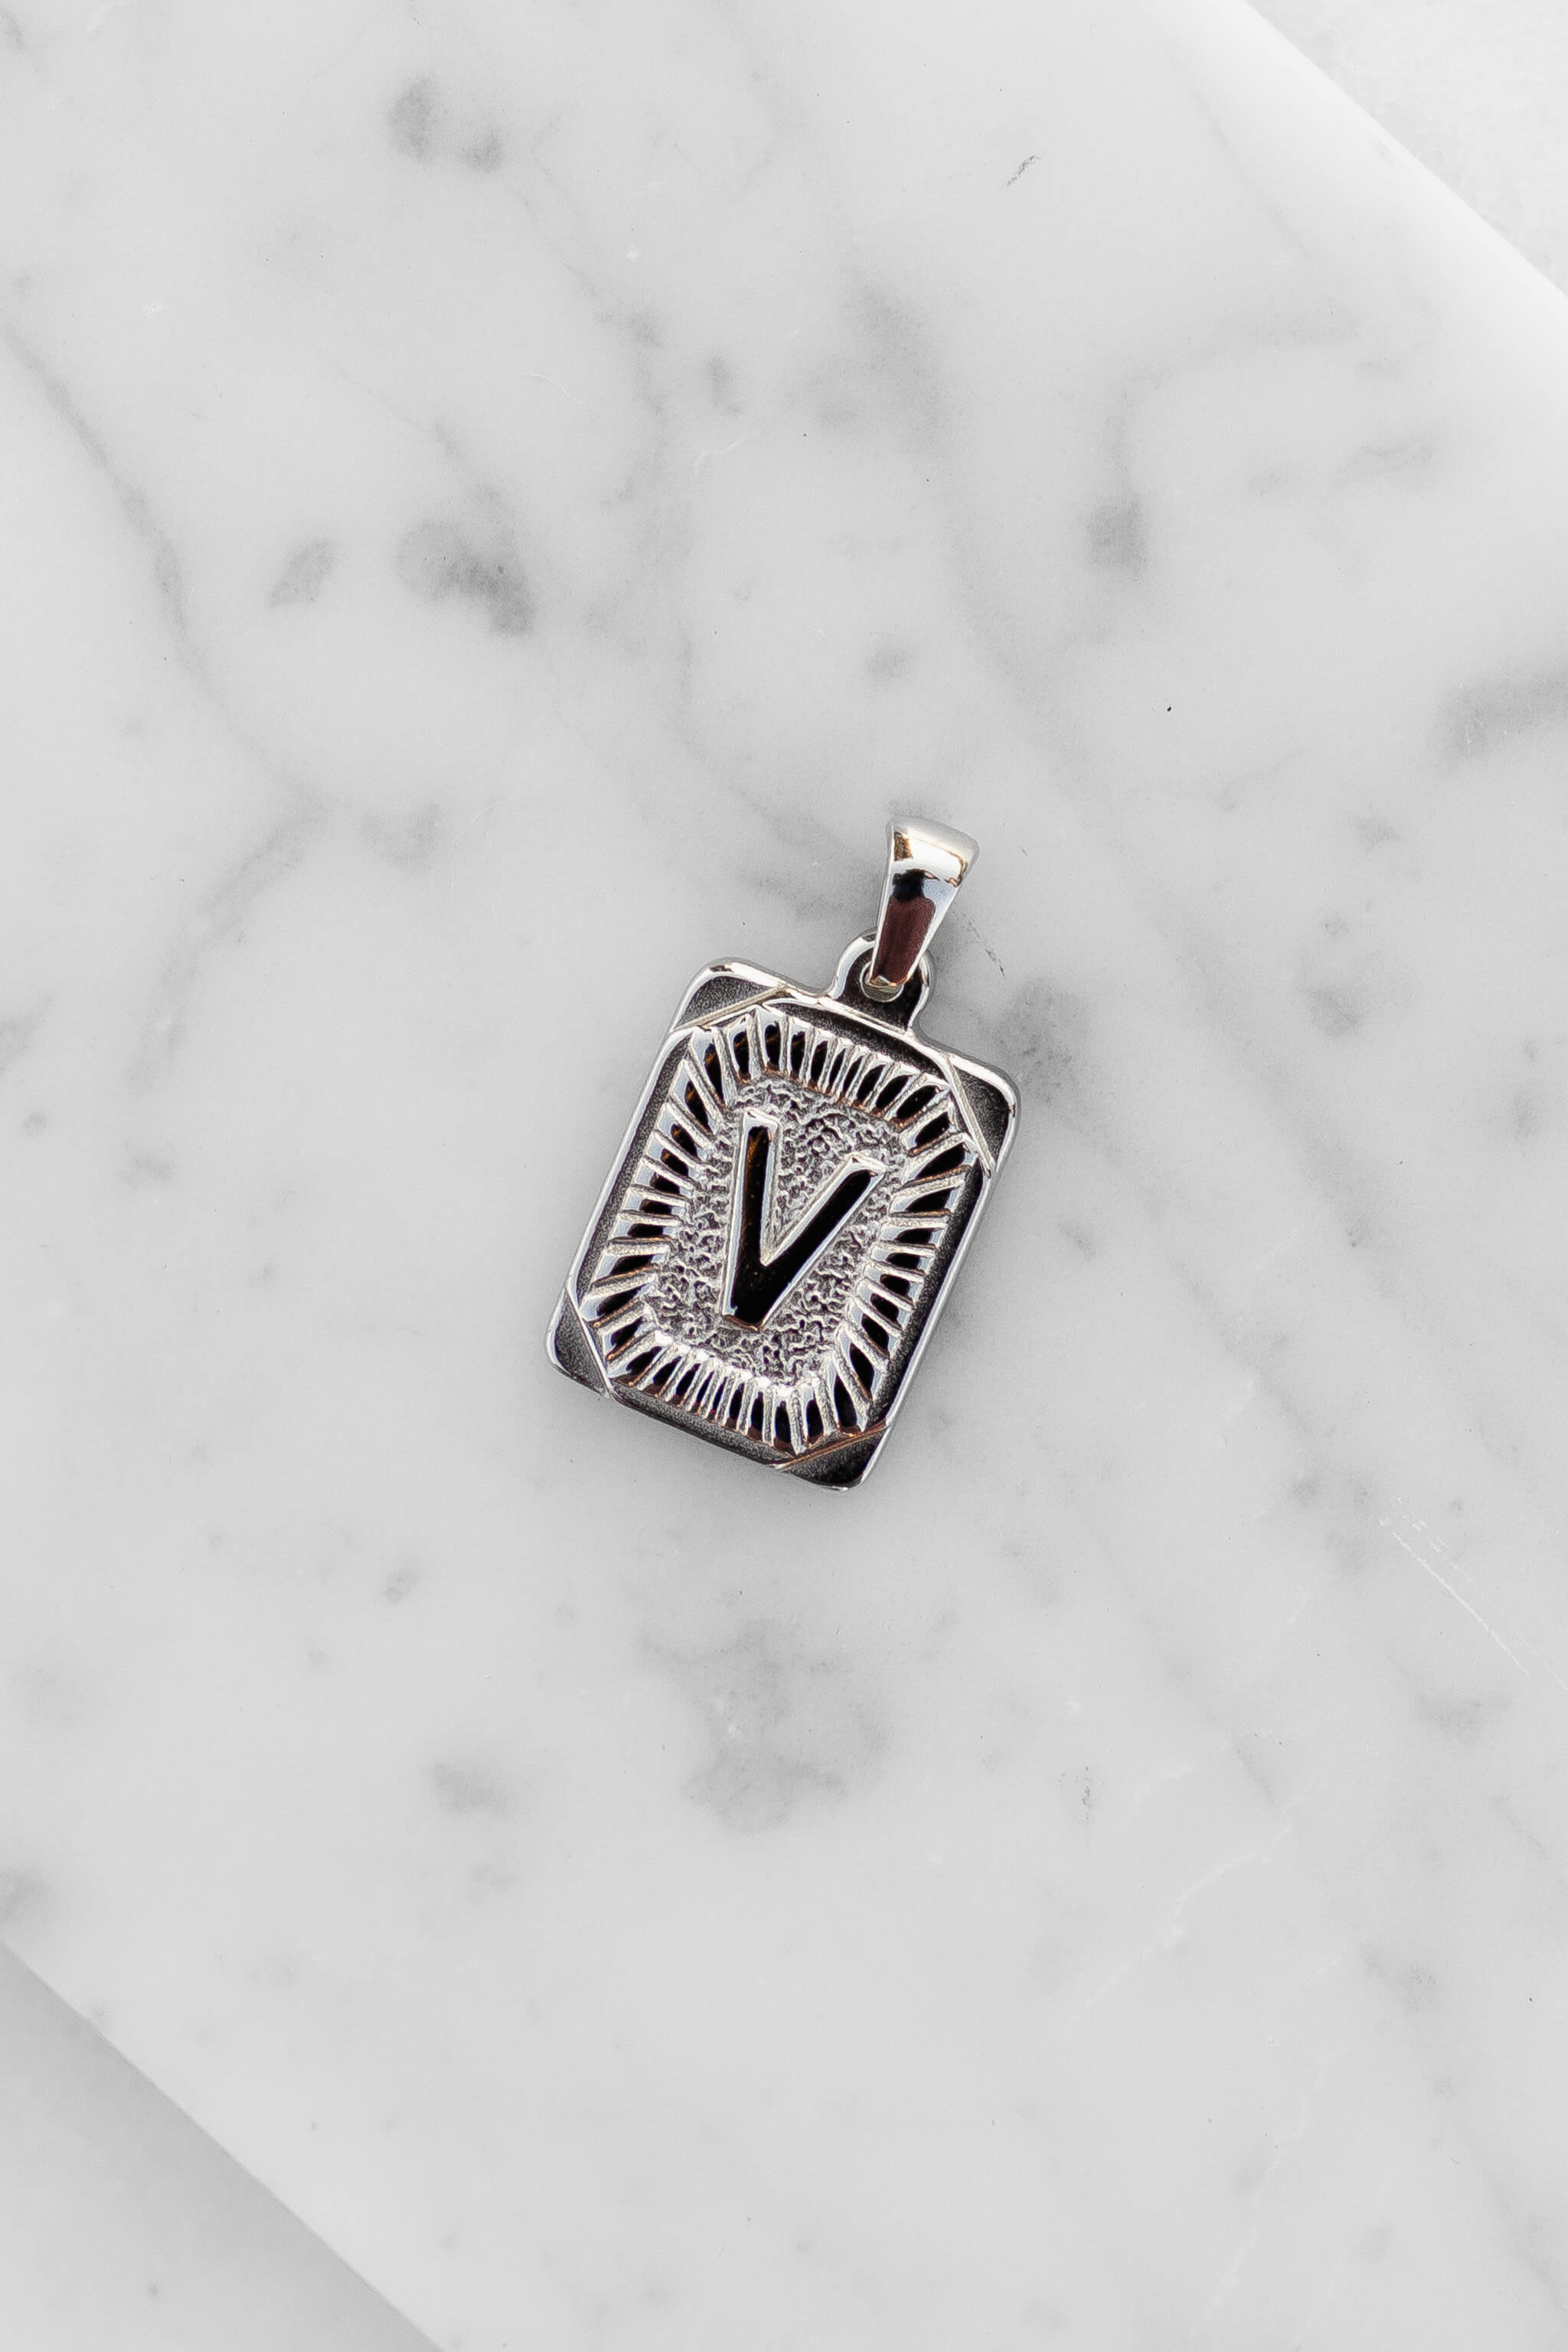 Silver Monogram Letter "V" Charm laying on a marble